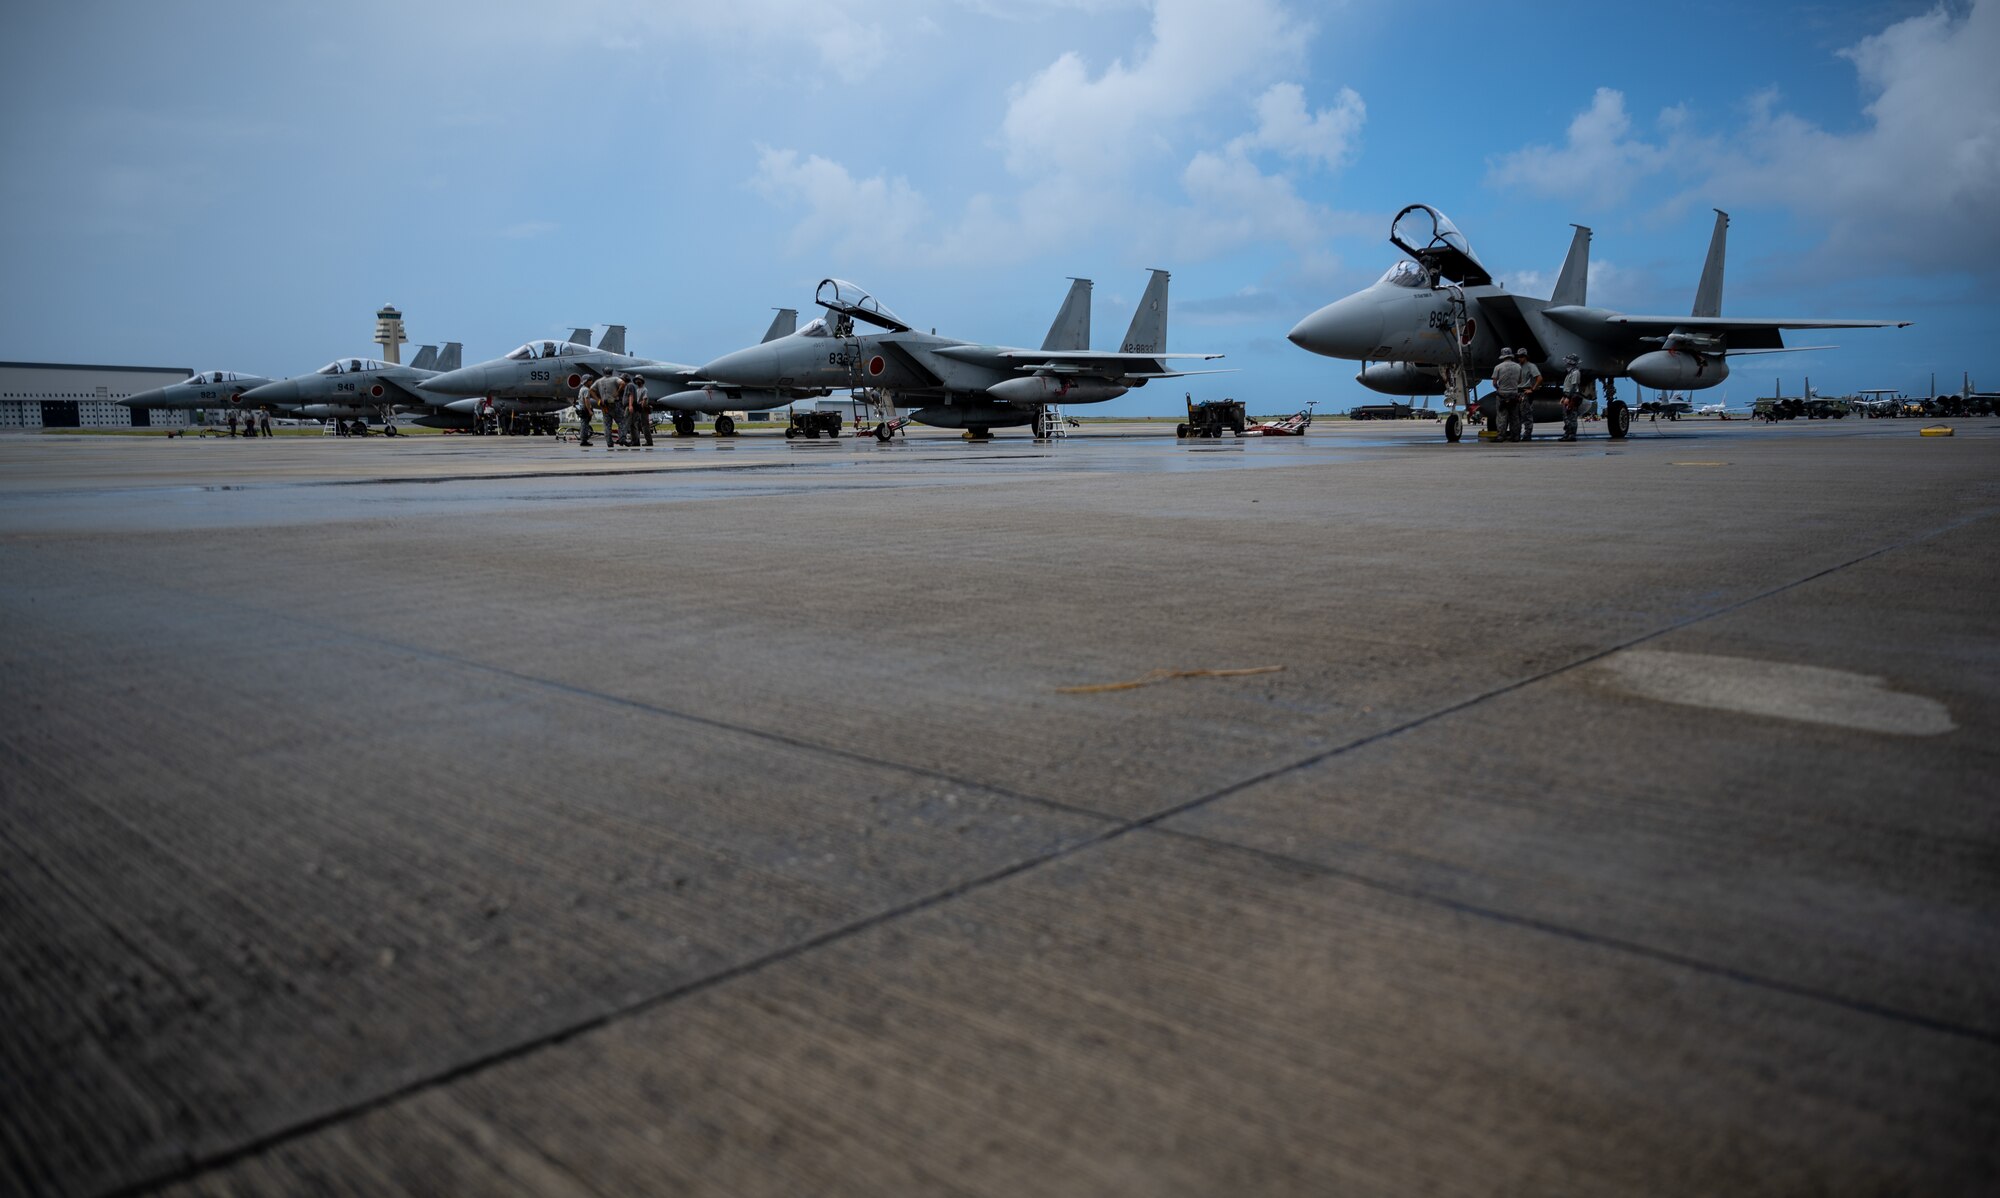 Japan Air Self-Defense Force F-15s are prepped for take-off in support of Exercise Southern Beach at Naha Air Base, Japan, Sept. 16, 2022. Exercises like Southern Beach allow U.S. and Japanese Airmen to routinely train together to enhance bilateral interoperability in support of the defense of Japan while securing a free and open Indo-Pacific region. (U.S. Air Force photo by Senior Airman Stephen Pulter)